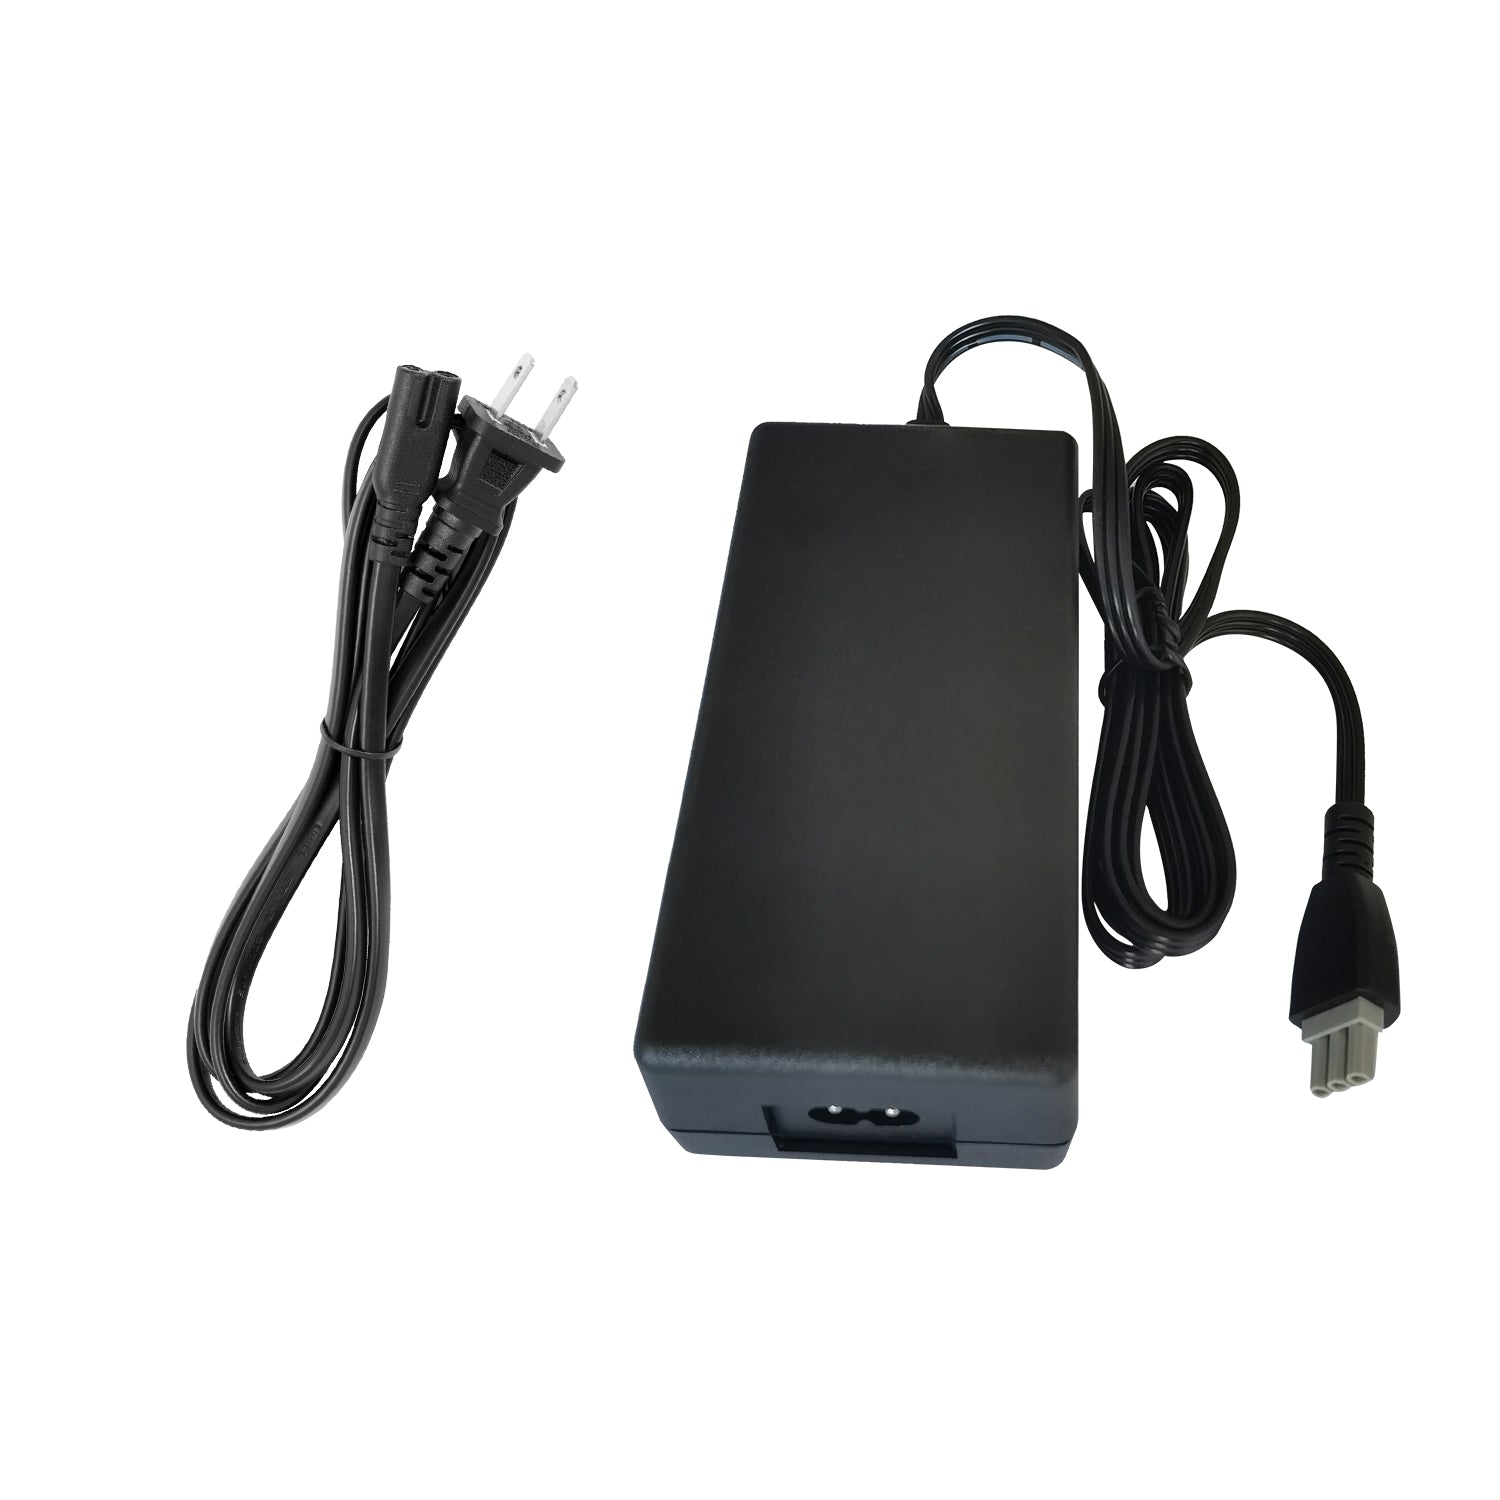 Power Adapter for HP PSC 1318 All-in-One Printer.